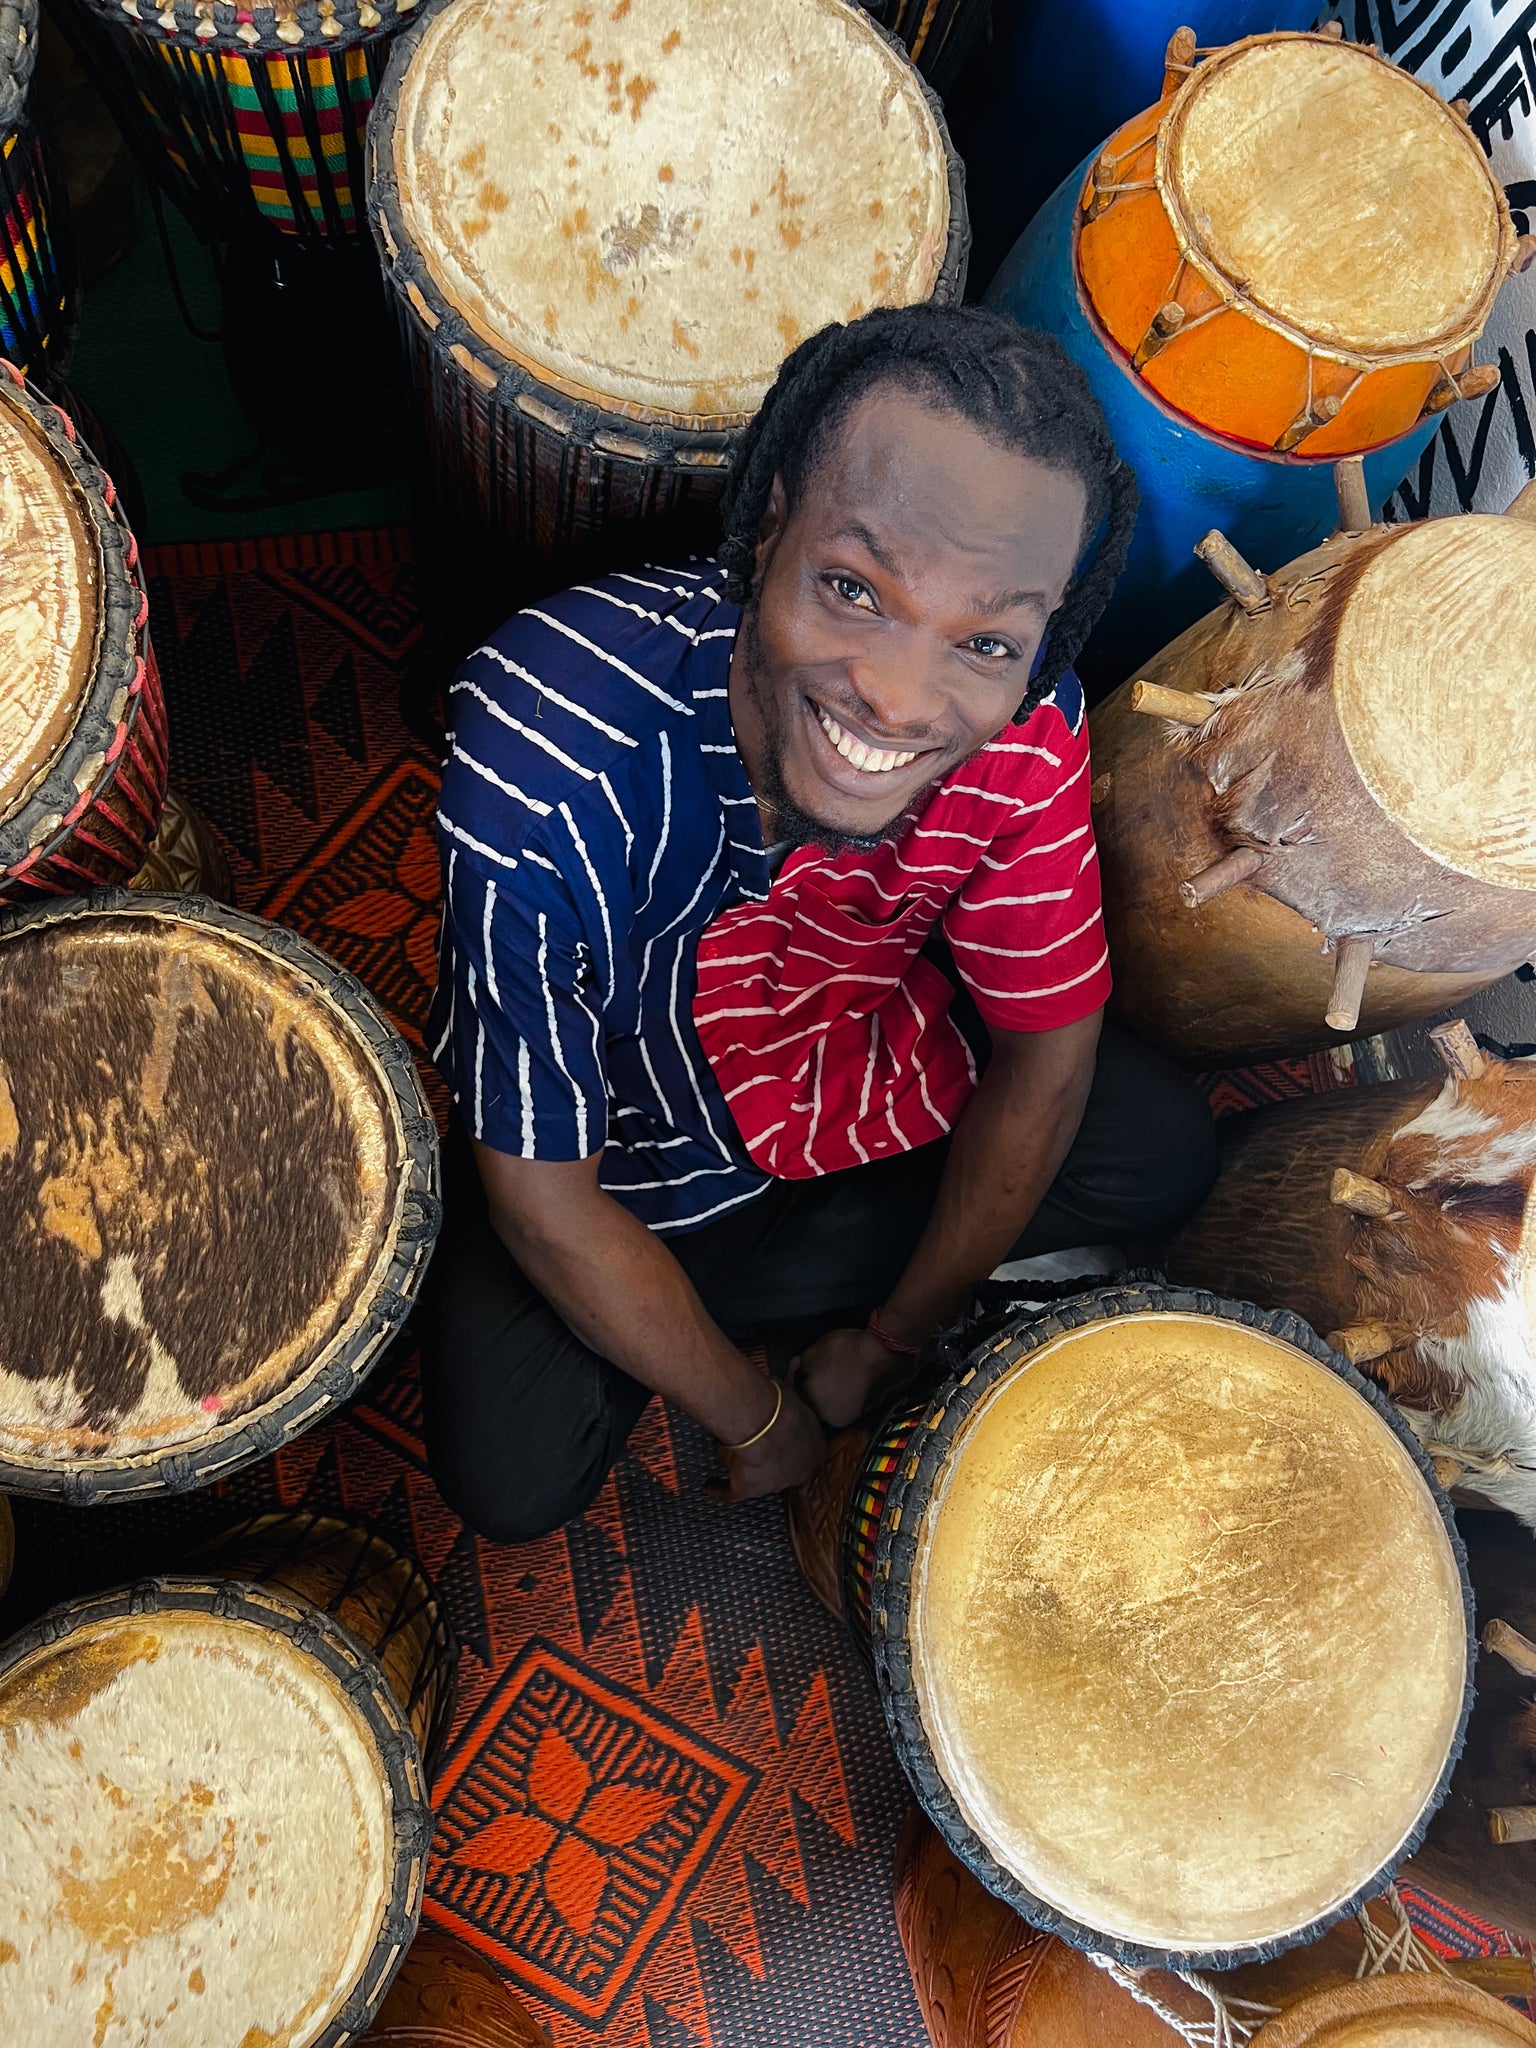 Conversations with Jedalo || The Djembe Drummer